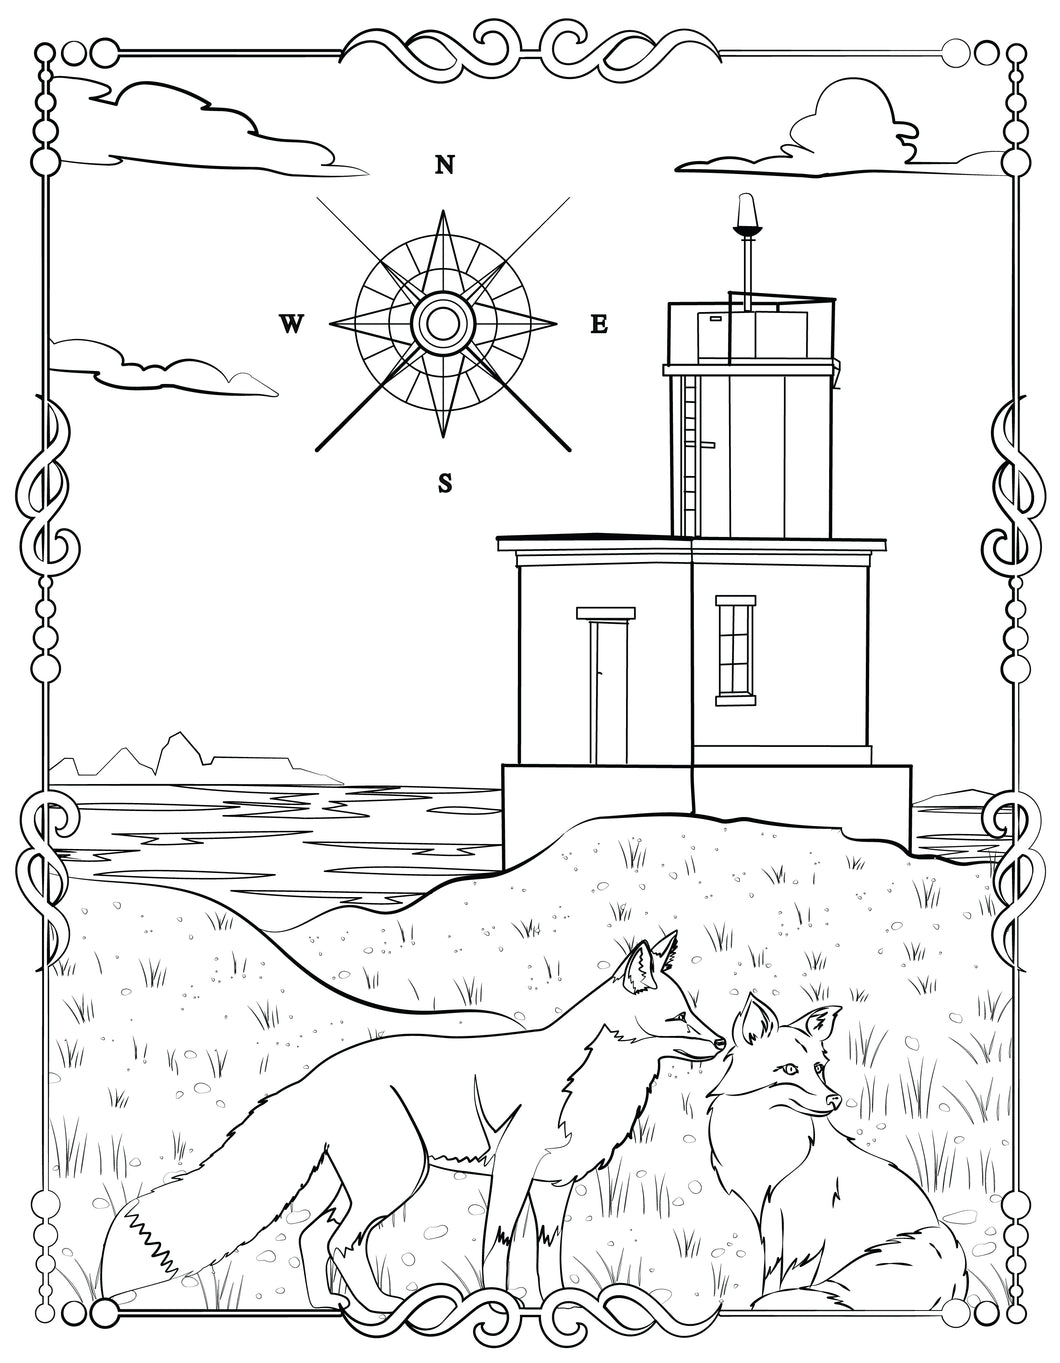 Single Coloring Book Page - Cattle Point Lighthouse, Washington - Digital Print-from-Home